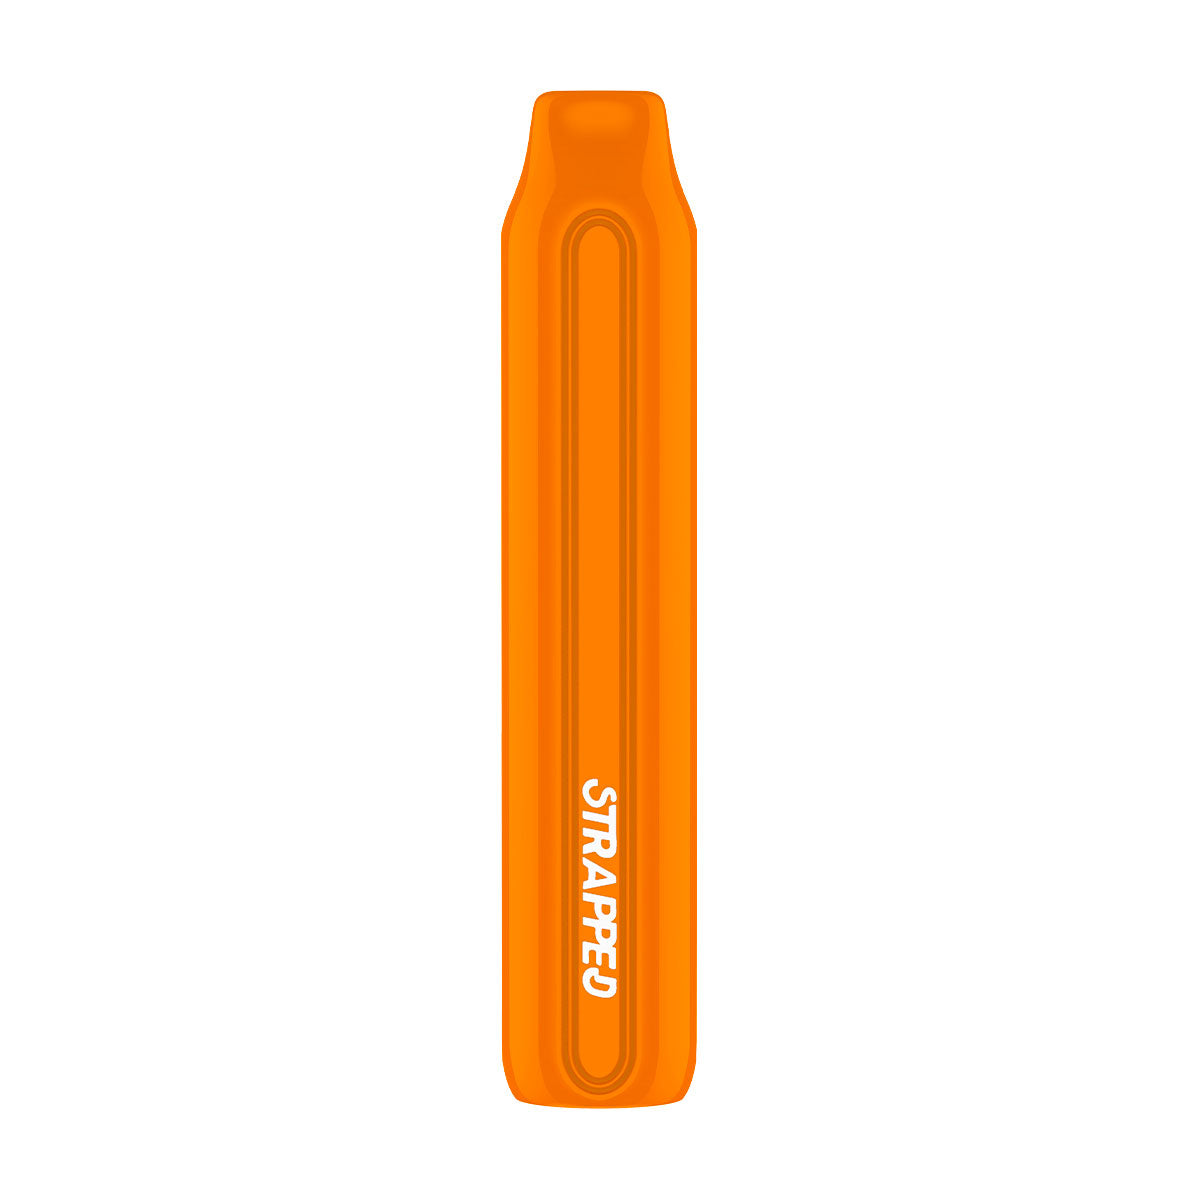 The Strapped Stix Orange Cola Disposable Vape combines a classic and world beloved cola beverage with a sweet and tangy tangerine for a finishing touch.